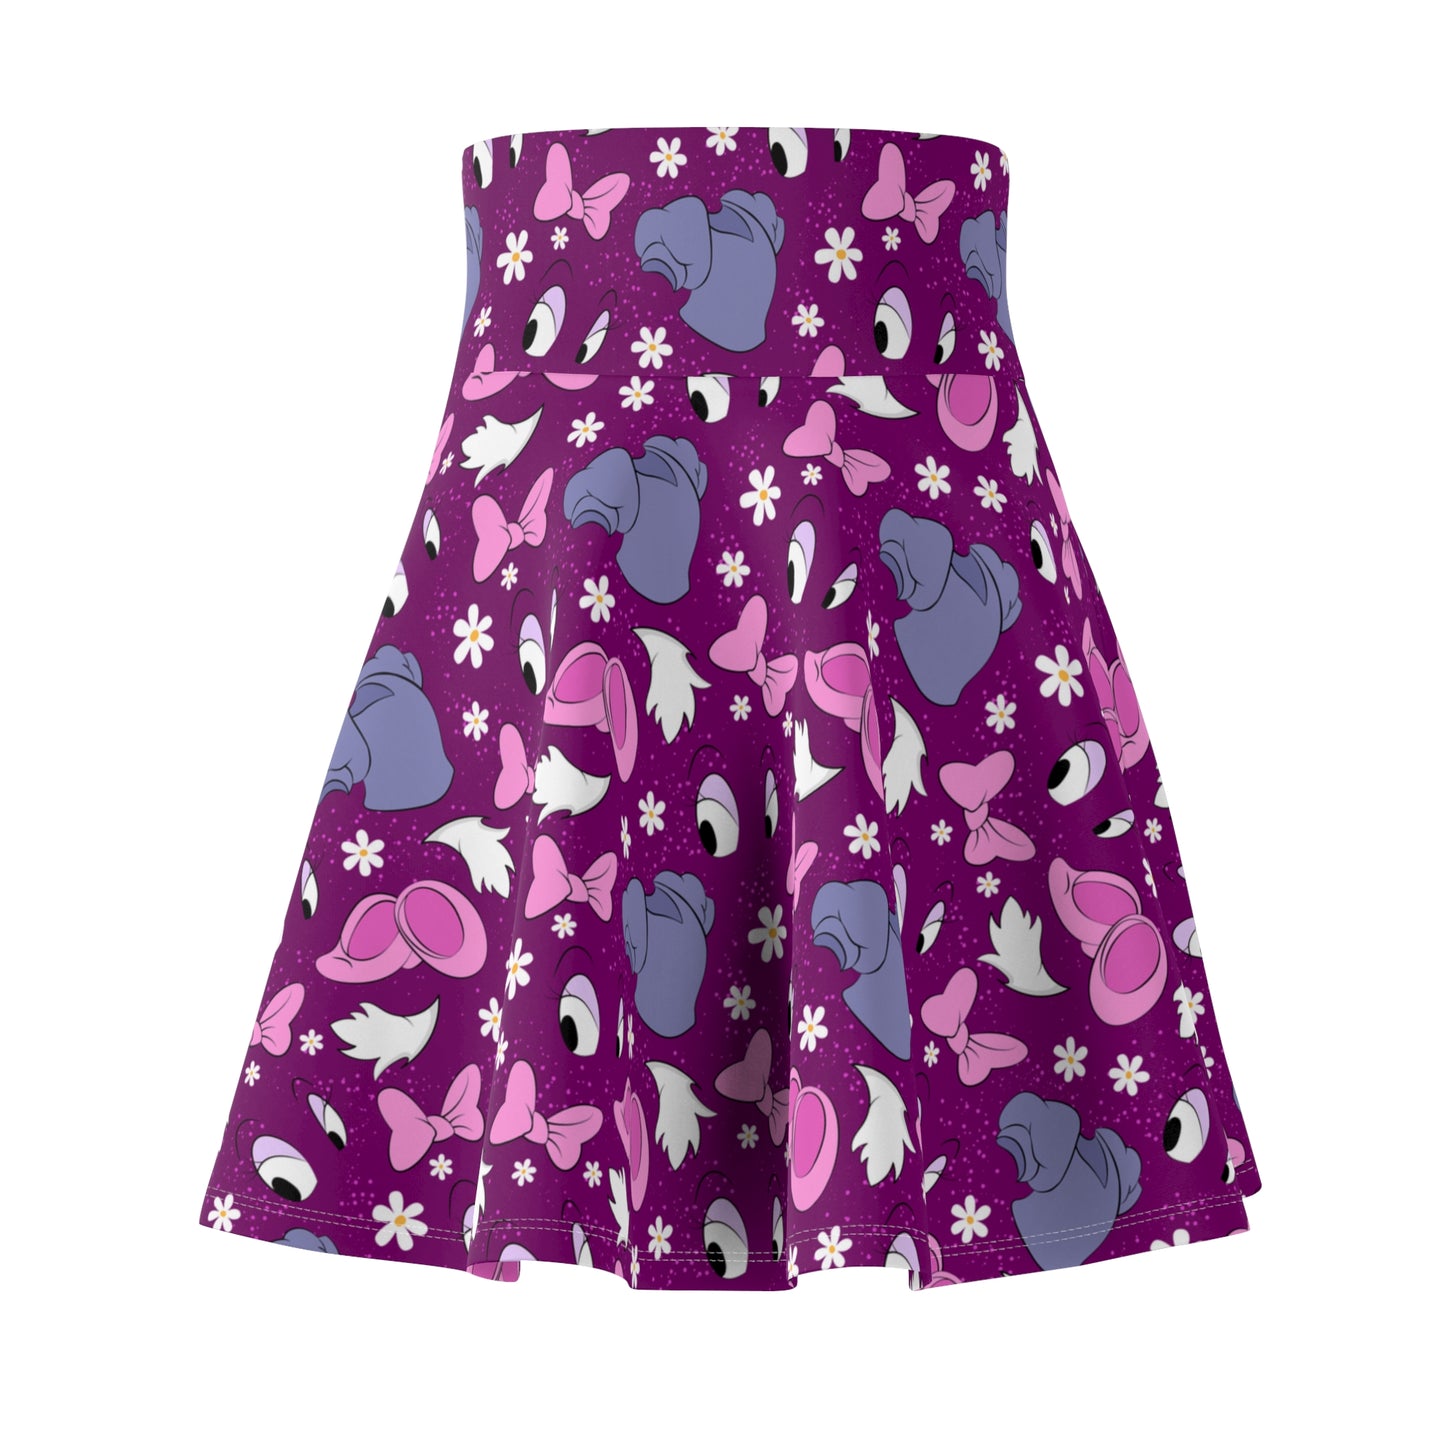 Born To Stand Out Women's Skater Skirt